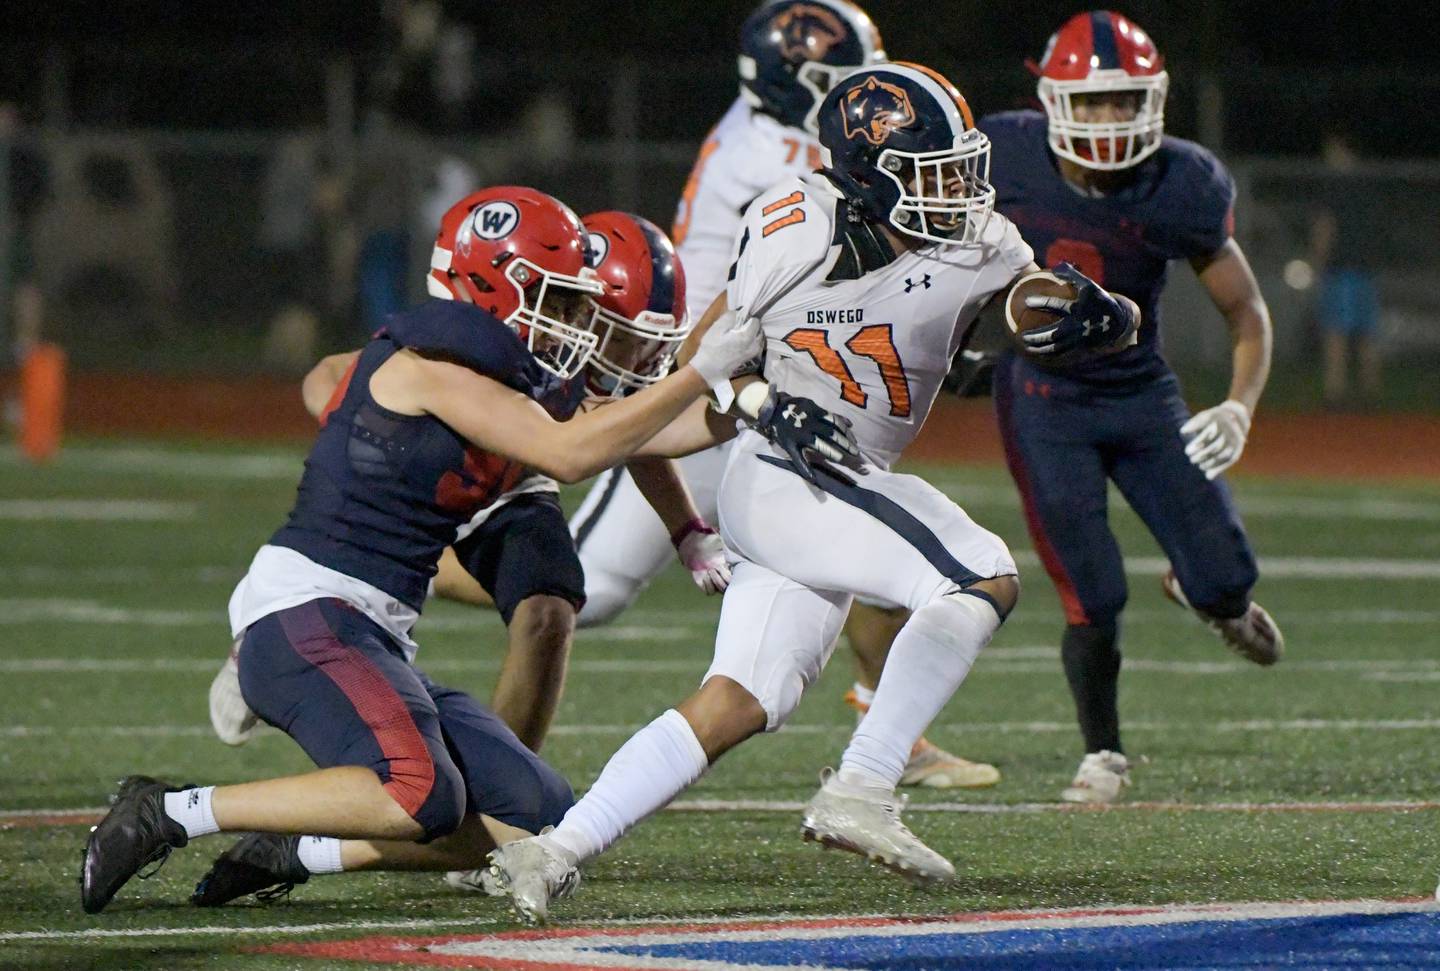 West Aurora's Fernando DeLeon (95) pulls on Oswego's Mark Melton (11) jersey as Melton gains some yards during third quarter of a game in Aurora on Friday, October 8, 2021.